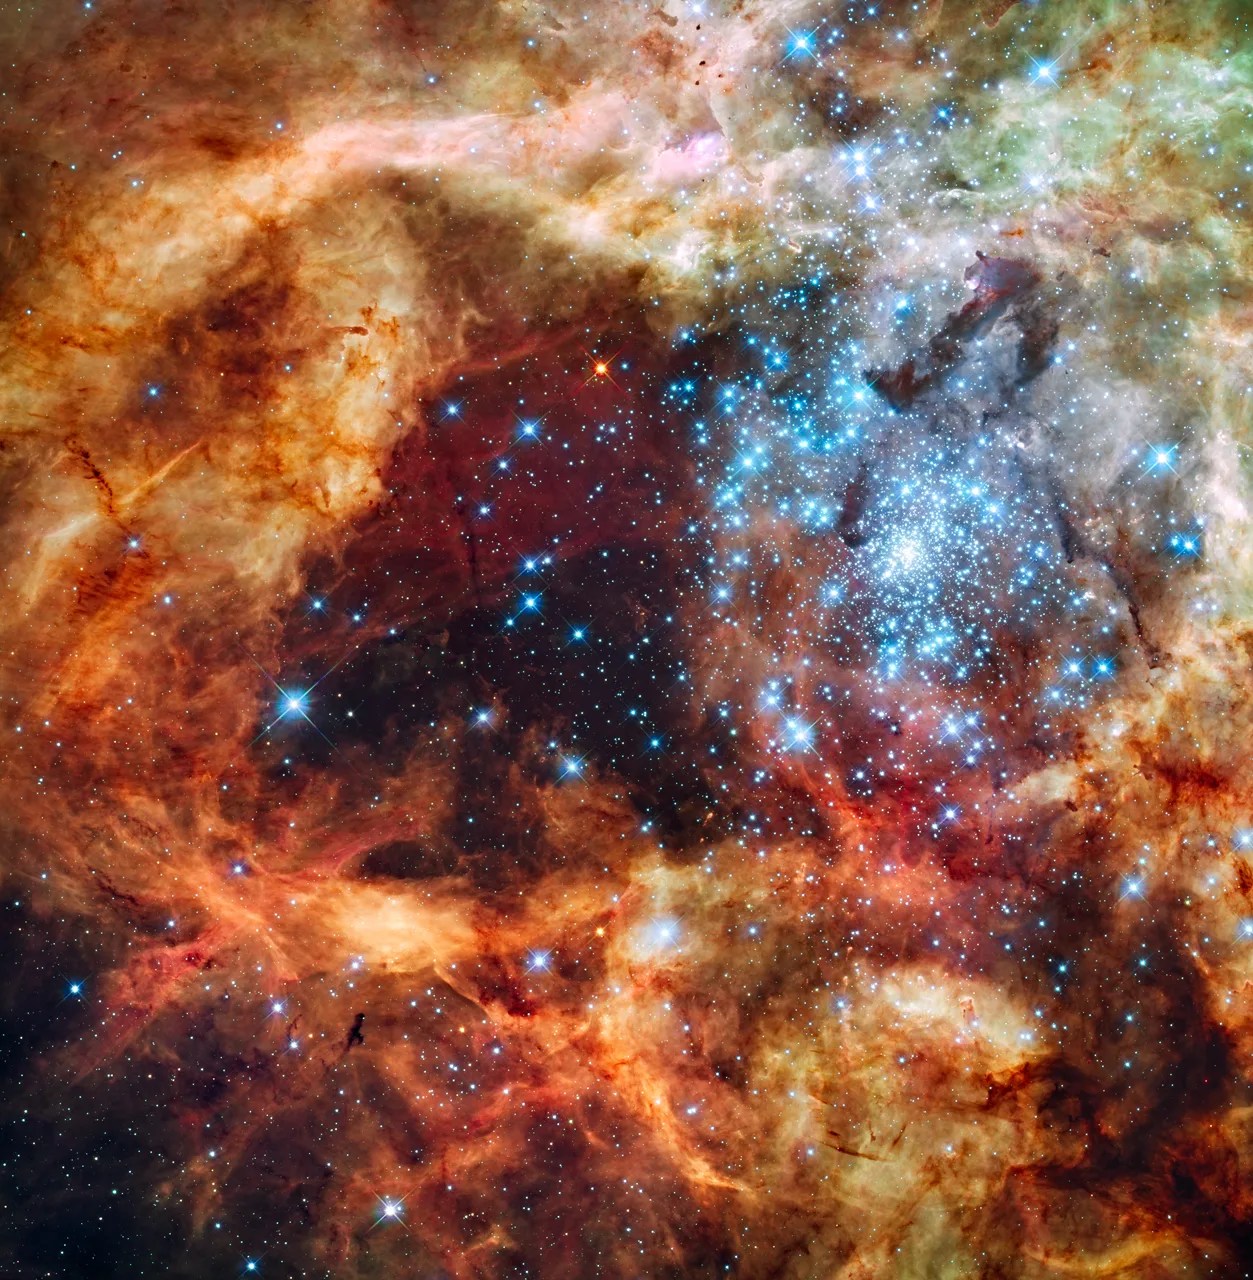 The massive, young stellar grouping, called R136, is only a few million years old and resides in the 30 Doradus Nebula, a turbulent star-birth region in the Large Magellanic Cloud (LMC), a satellite galaxy of our Milky Way. There is no known star-forming region in our galaxy as large or as prolific as 30 Doradus. Credit: NASA, ESA, and F. Paresce (INAF-IASF, Bologna, Italy), R. O'Connell (University of Virginia, Charlottesville), and the Wide Field Camera 3 Science Oversight Committee